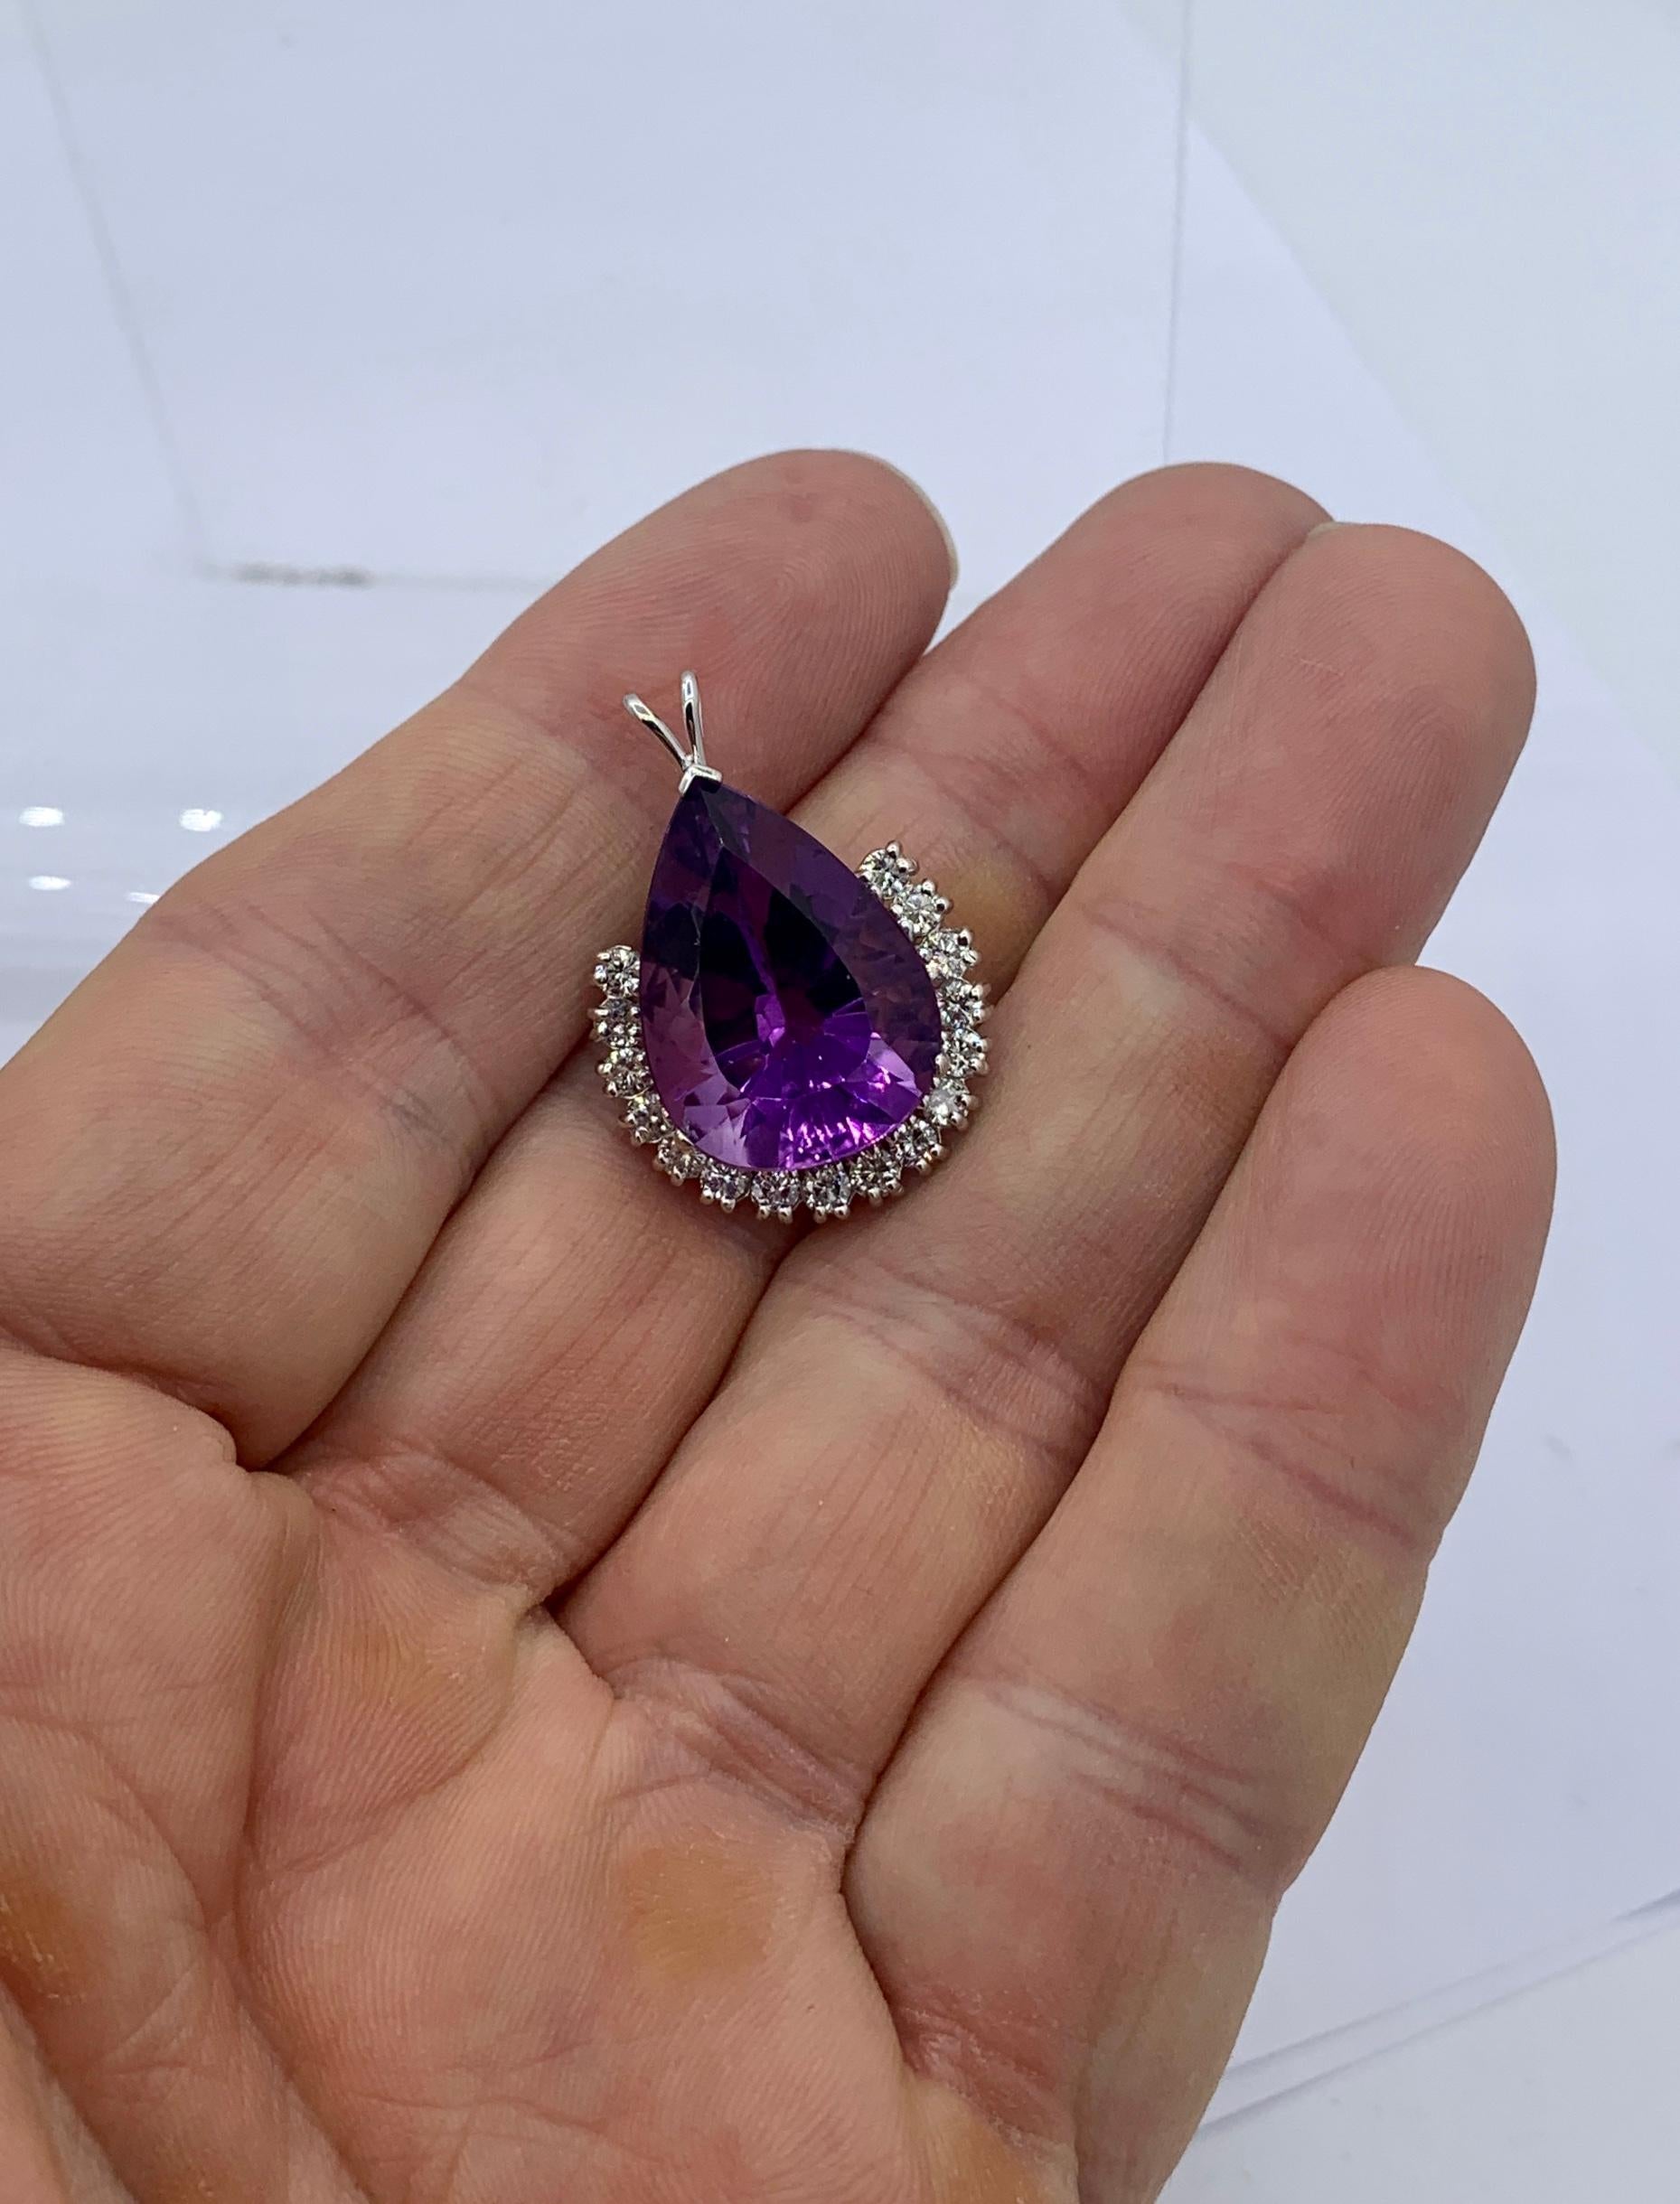 18 Carat Pear Cut Amethyst 1.5 Carat Diamond Pendant Necklace Antique White Gold In Excellent Condition For Sale In New York, NY